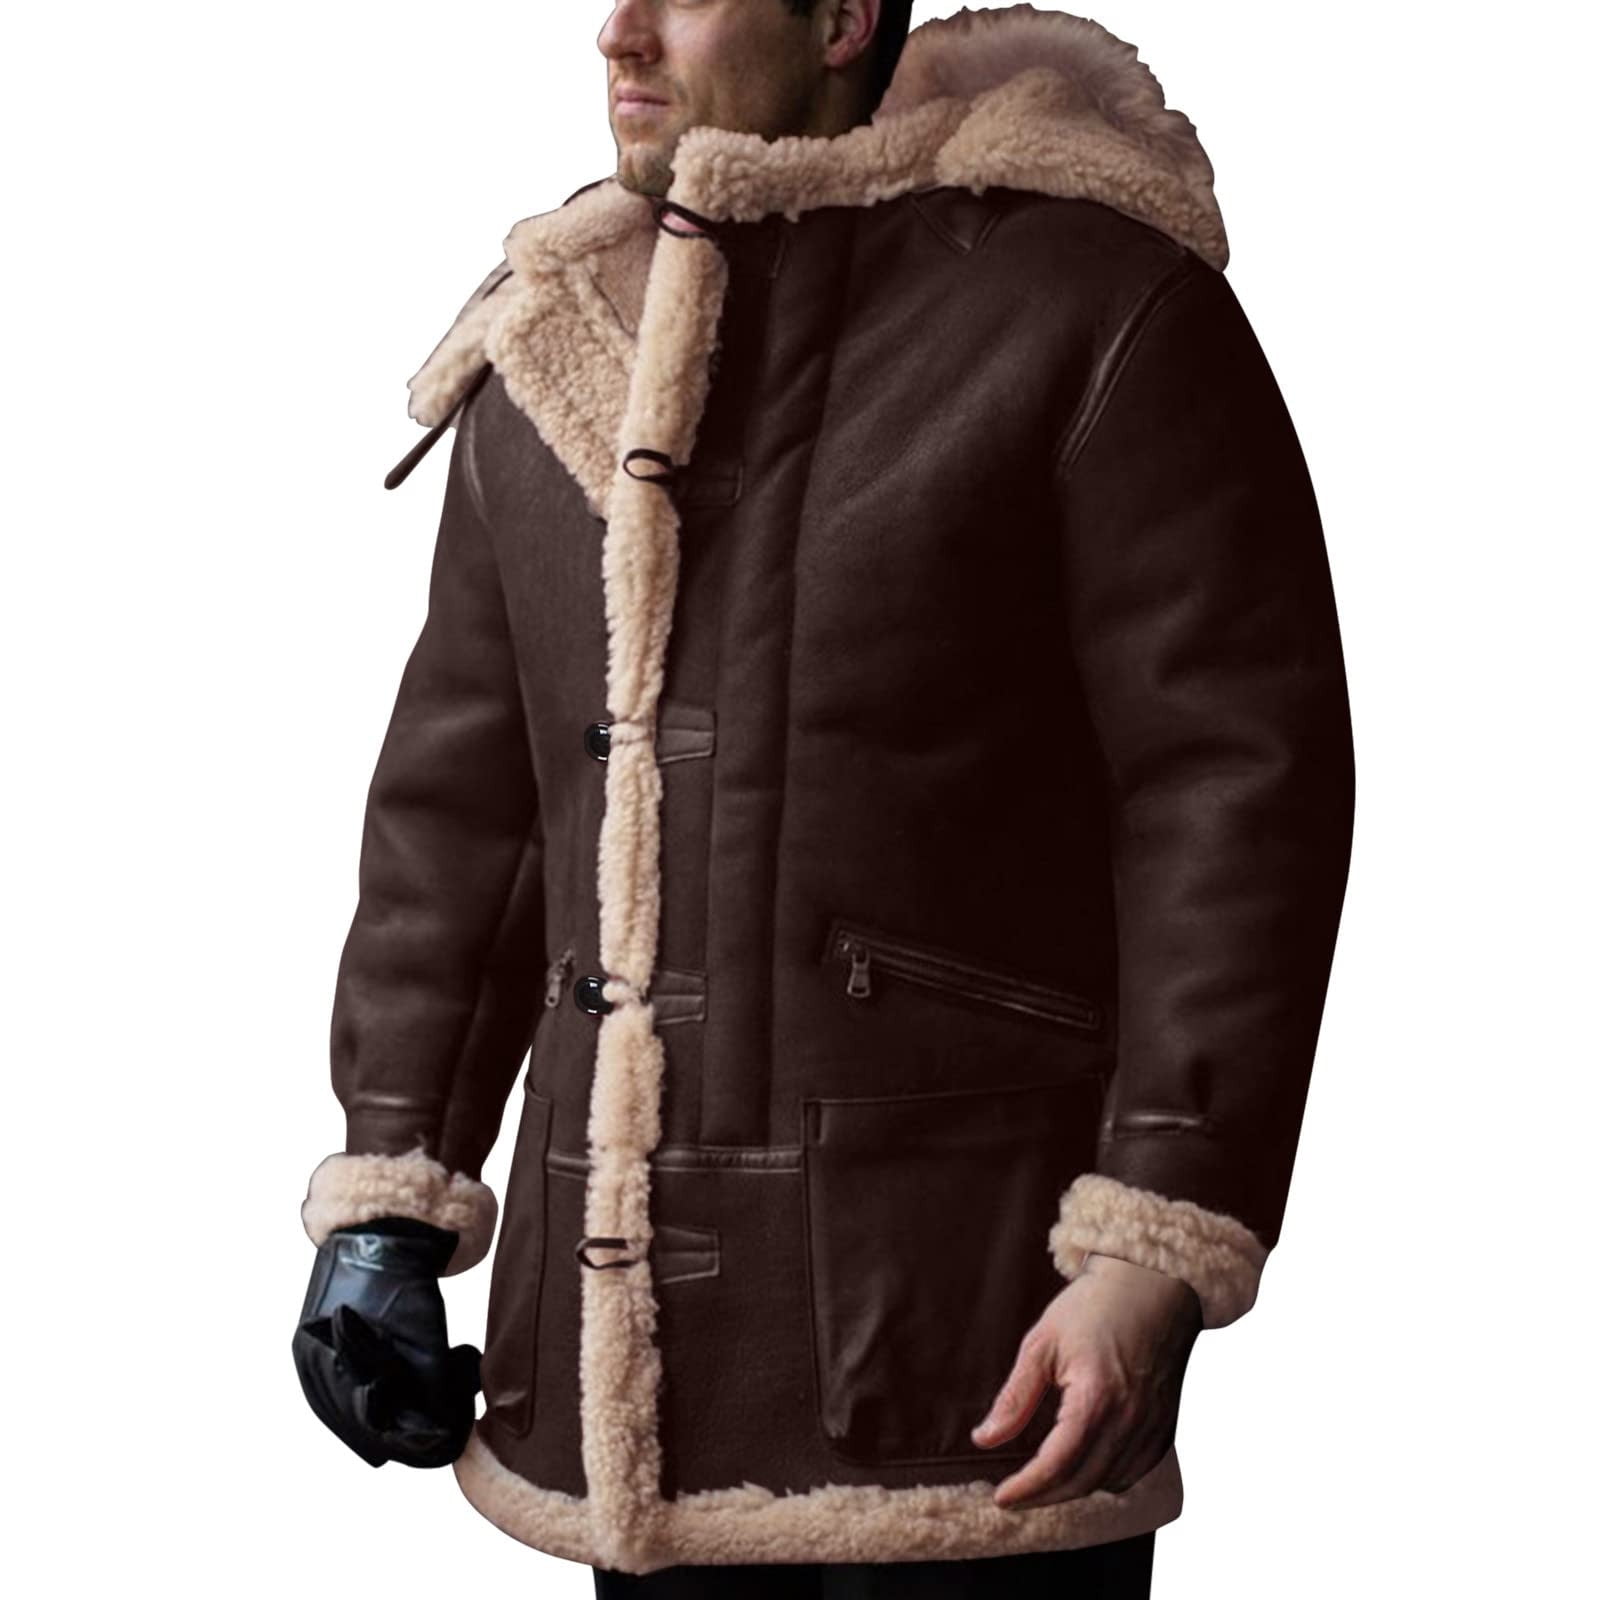 Men's Shearling Faux Suede Leather Coat Winter Thick Warm Sherpa Lined ...